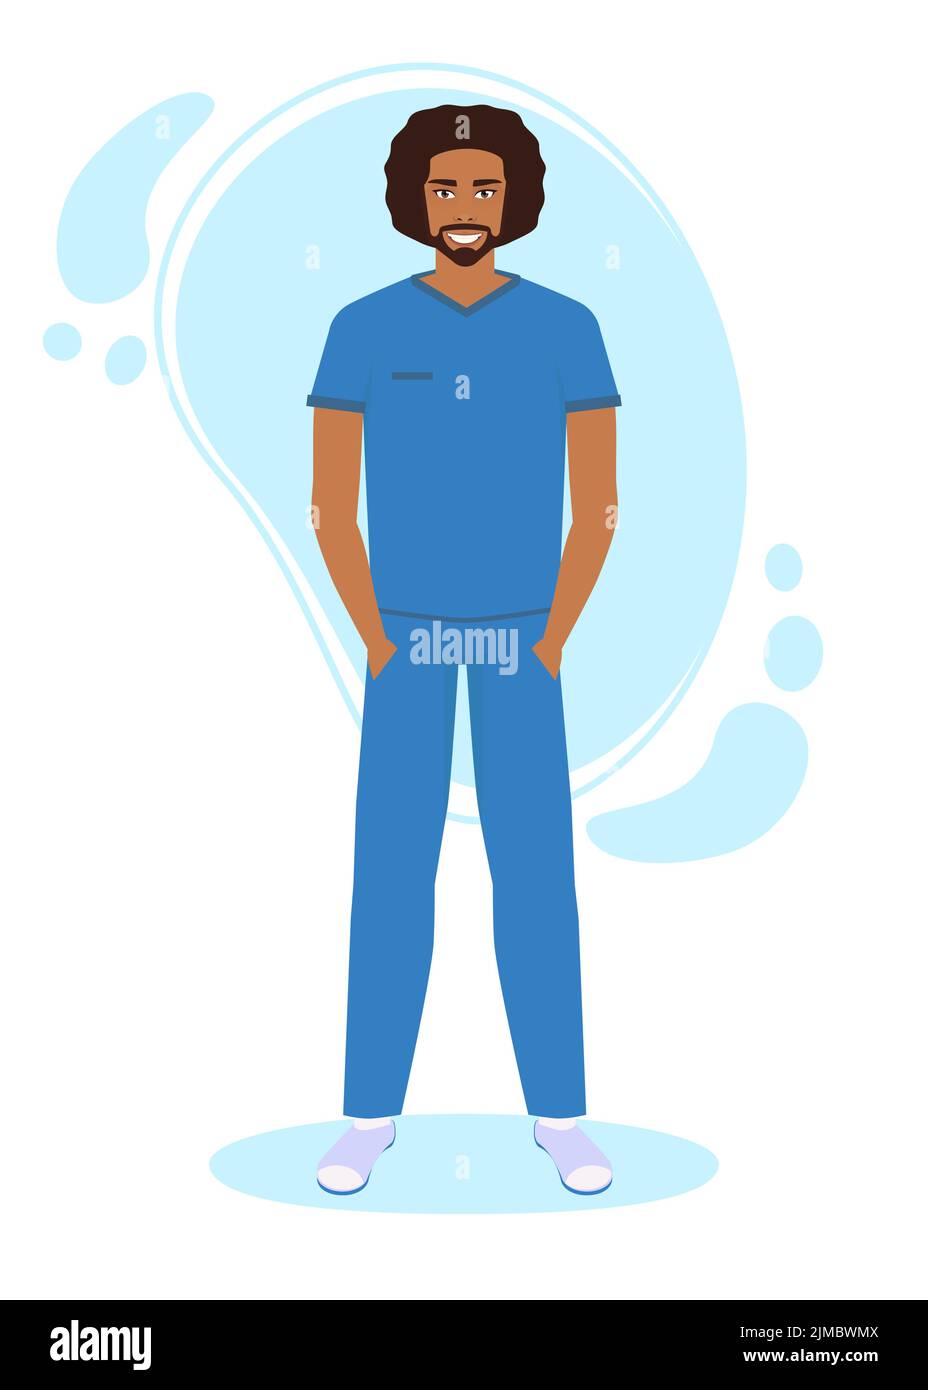 Medical Men Character in Standing Pose. Doctor or nurse cartoon character. Medical staff concept in hospital or clinic. Stock Vector